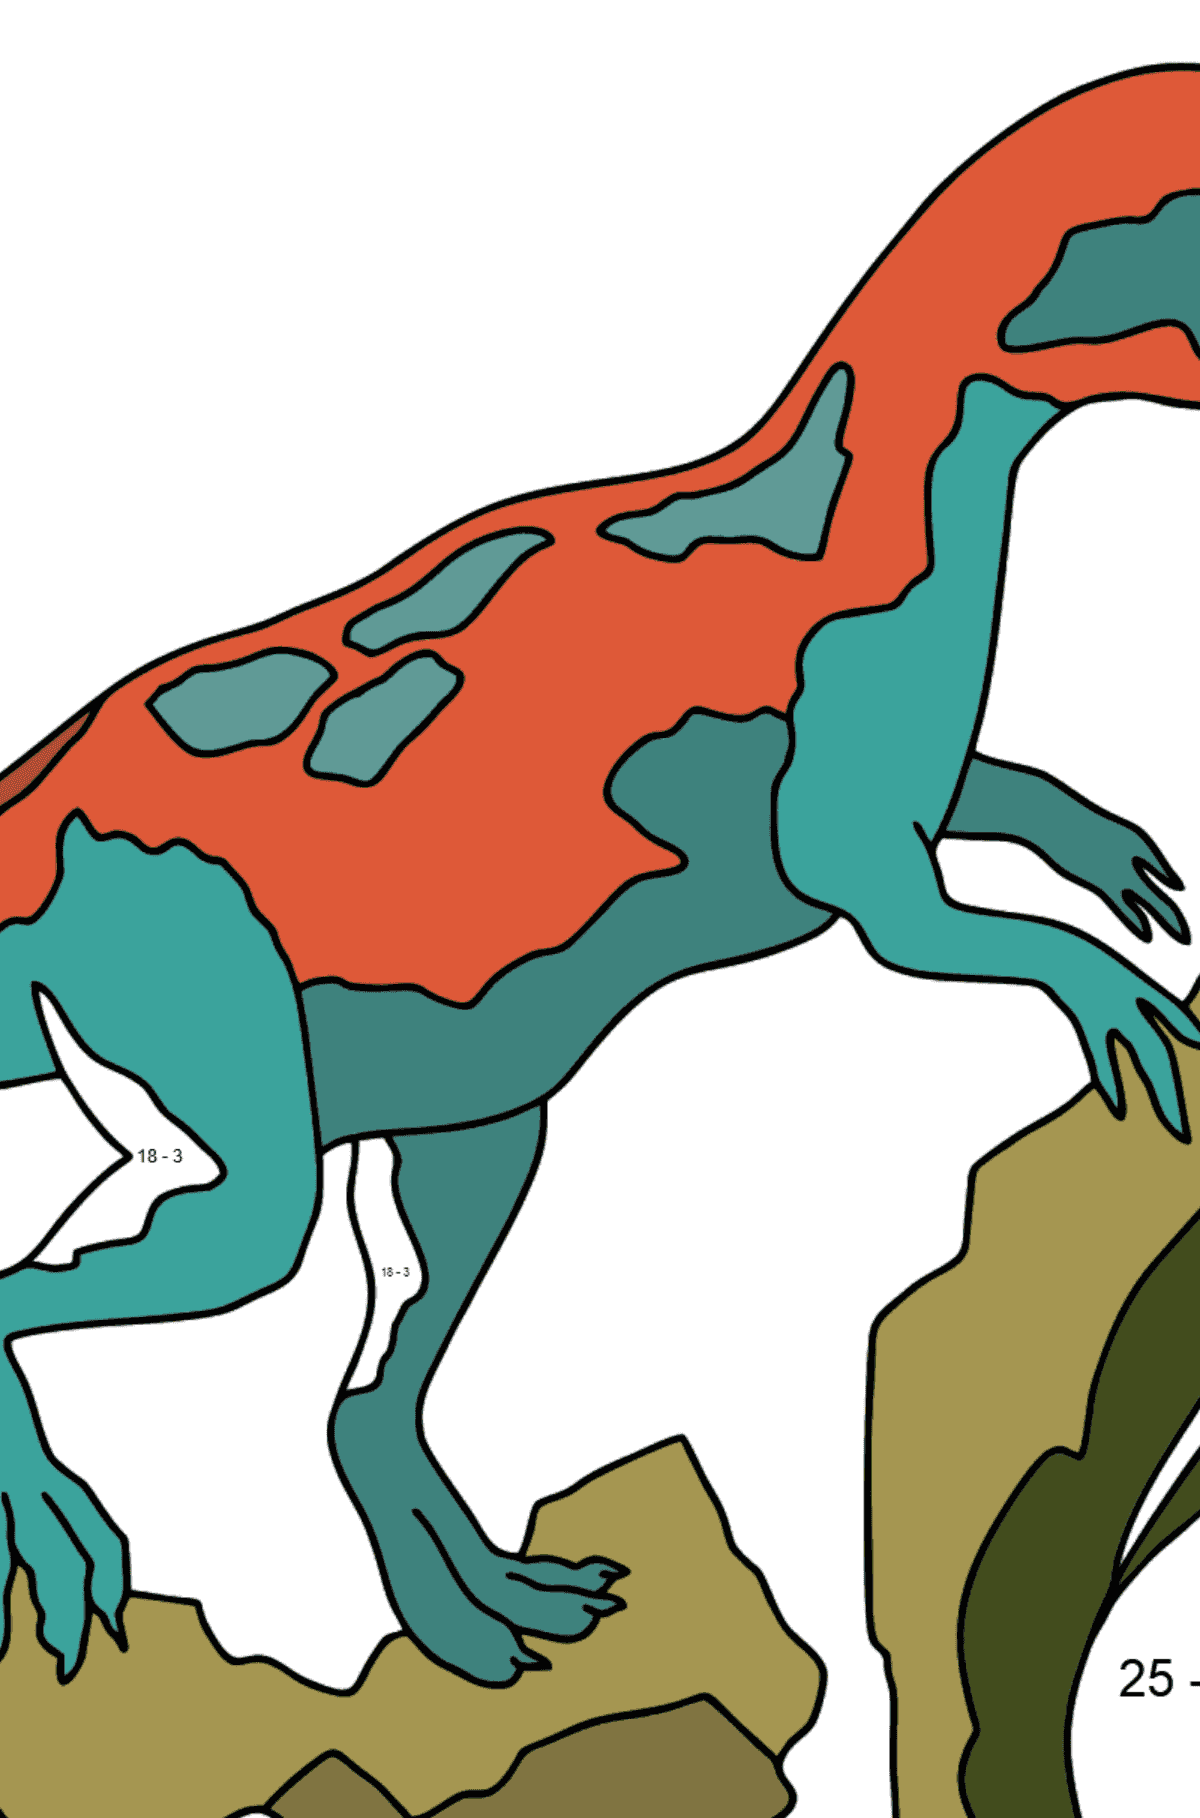 Coloring Page - Allosaurus - A Distinct Representative of Dinosaurs - Math Coloring - Subtraction for Kids